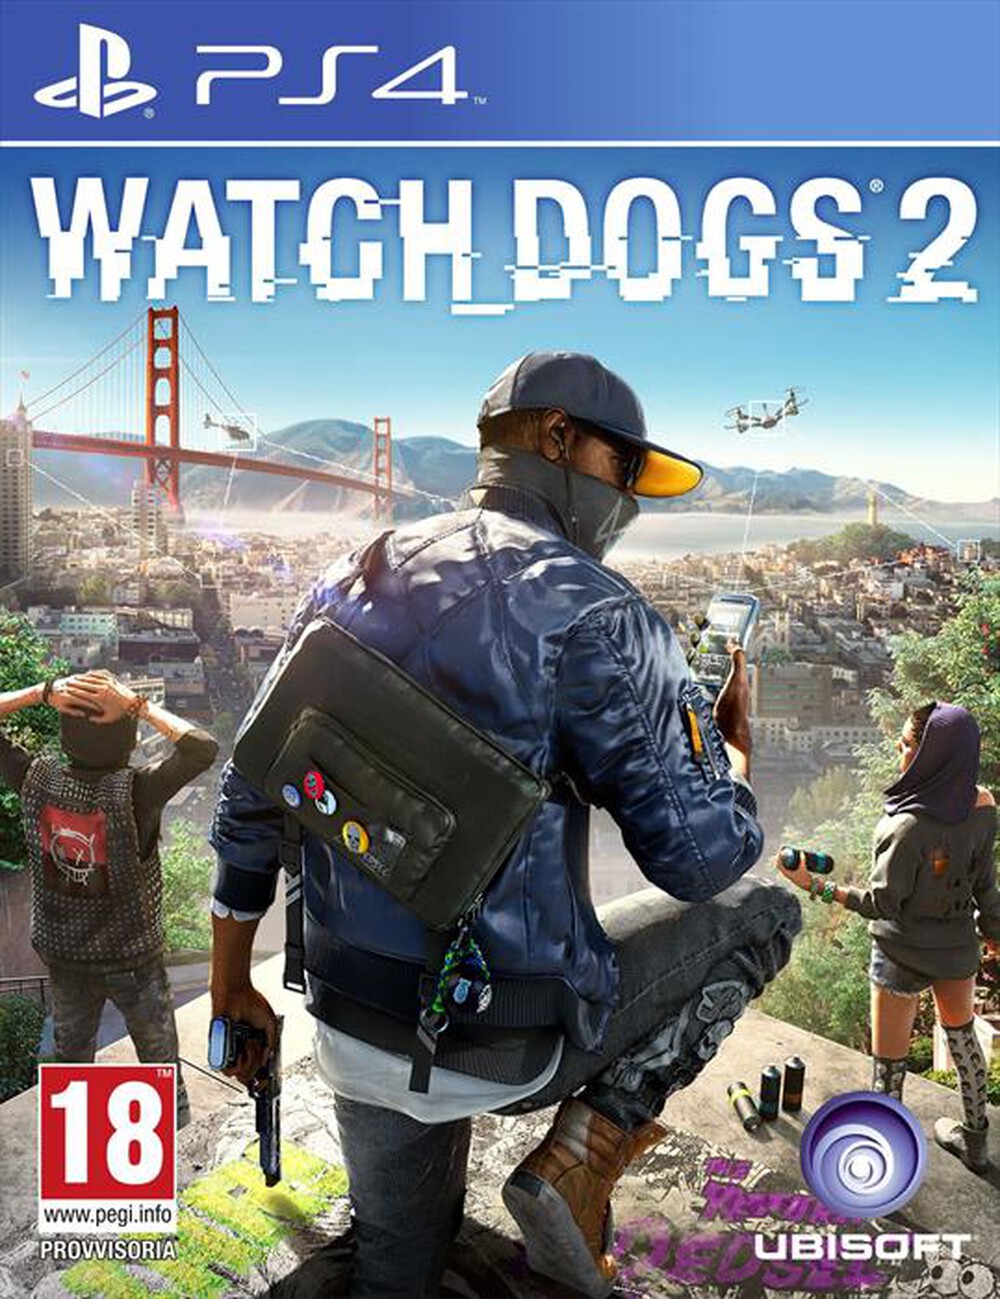 "UBISOFT - Watch Dogs 2 PS4 - "